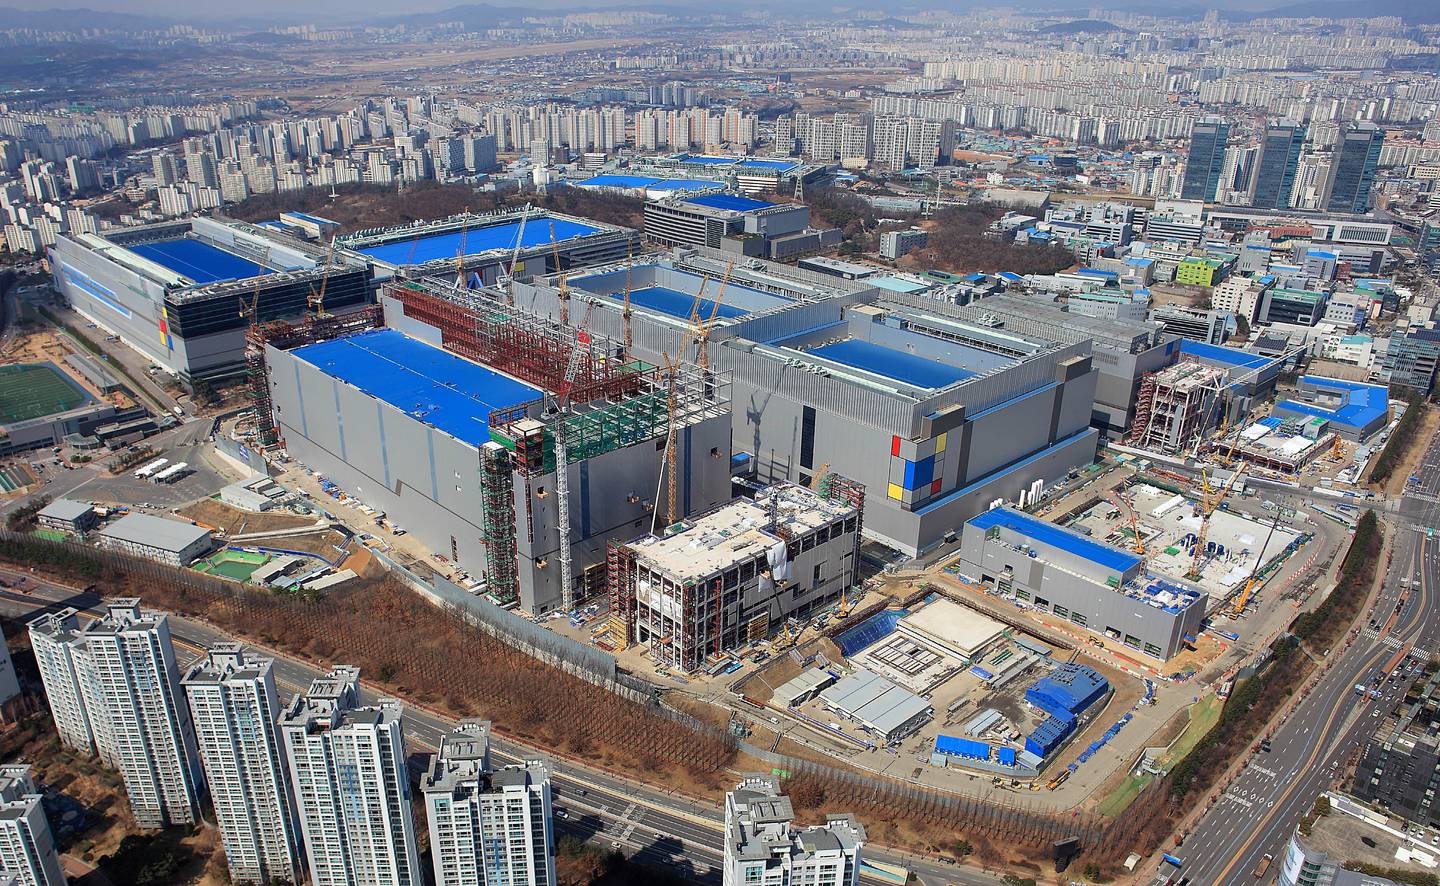 epa07509193 A handout photo made available by Samsung Electronics Co. shows the company's semiconductor production facility in Hwaseong, south of Seoul, South Korea, 16 April 2019. The world's largest memory chip maker said it has completed the development of its latest 5-nanometer (nm), ultraviolet (EUV)-based fabrication process technology.  EPA/SAMSUNG ELECTRONICS CO. / HANDOUT  HANDOUT EDITORIAL USE ONLY/NO SALES